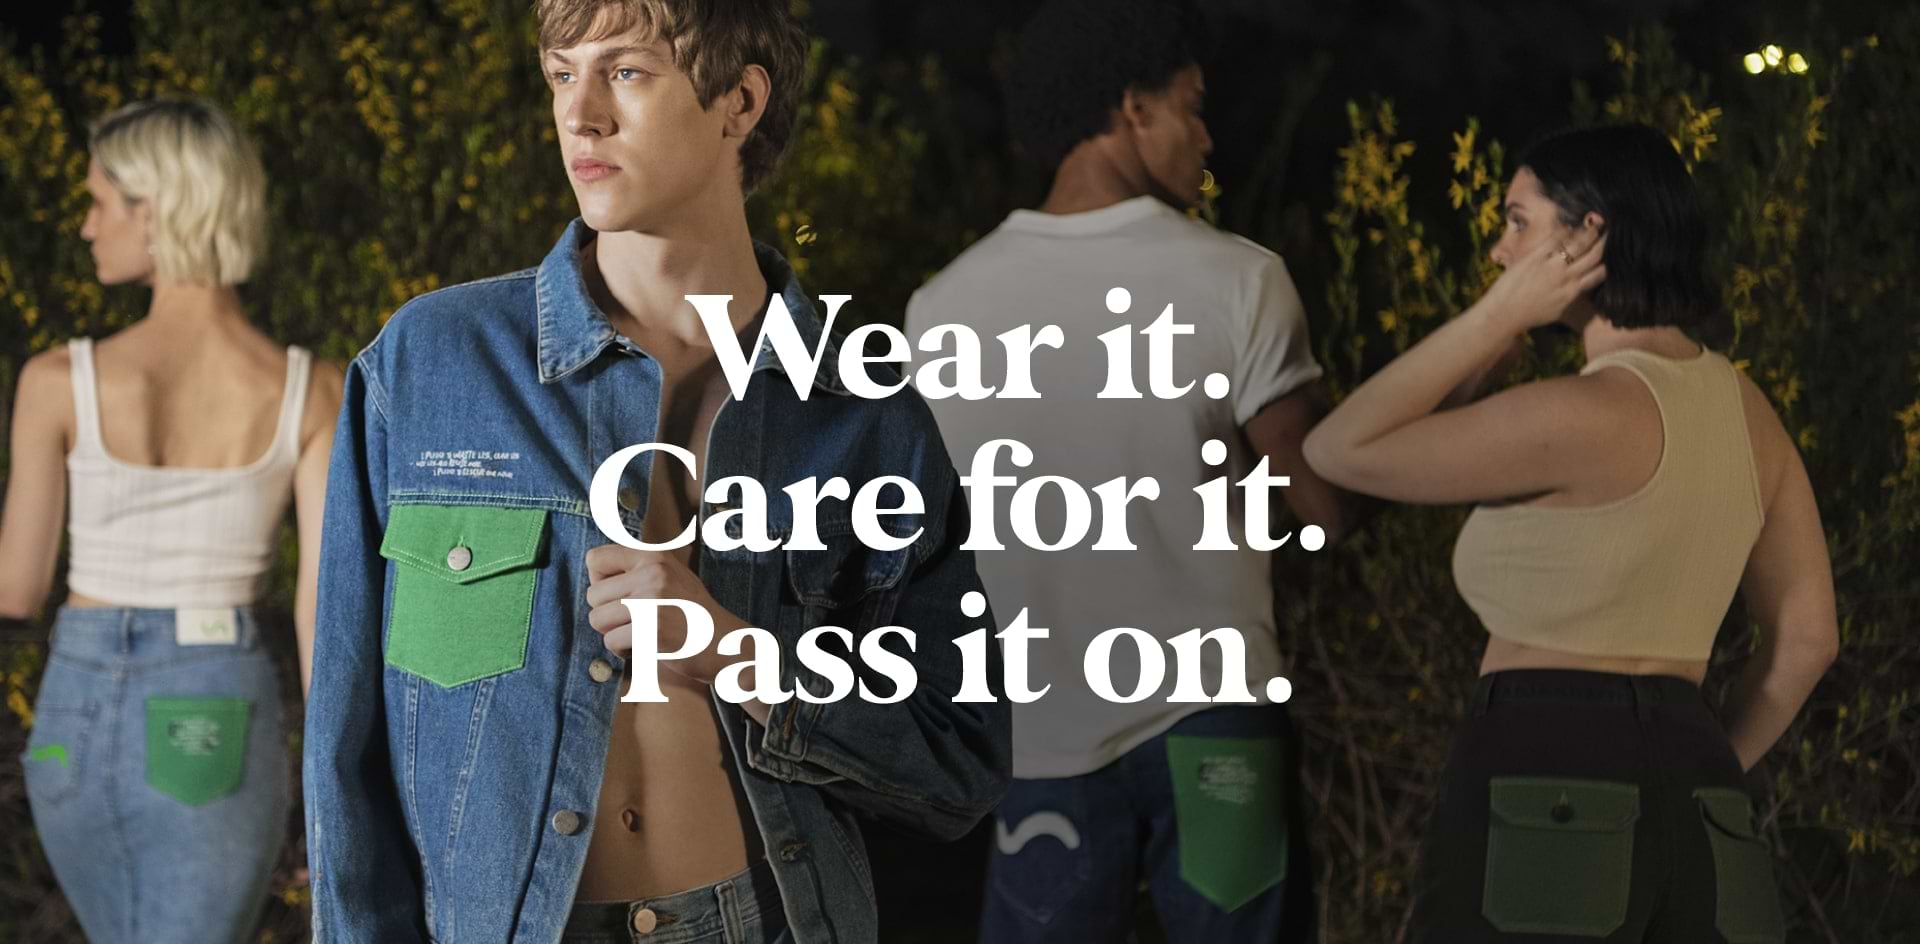 Wear it. Care for it. Pass it on. Tips about caring for sustainable fashion and upcycled denim.